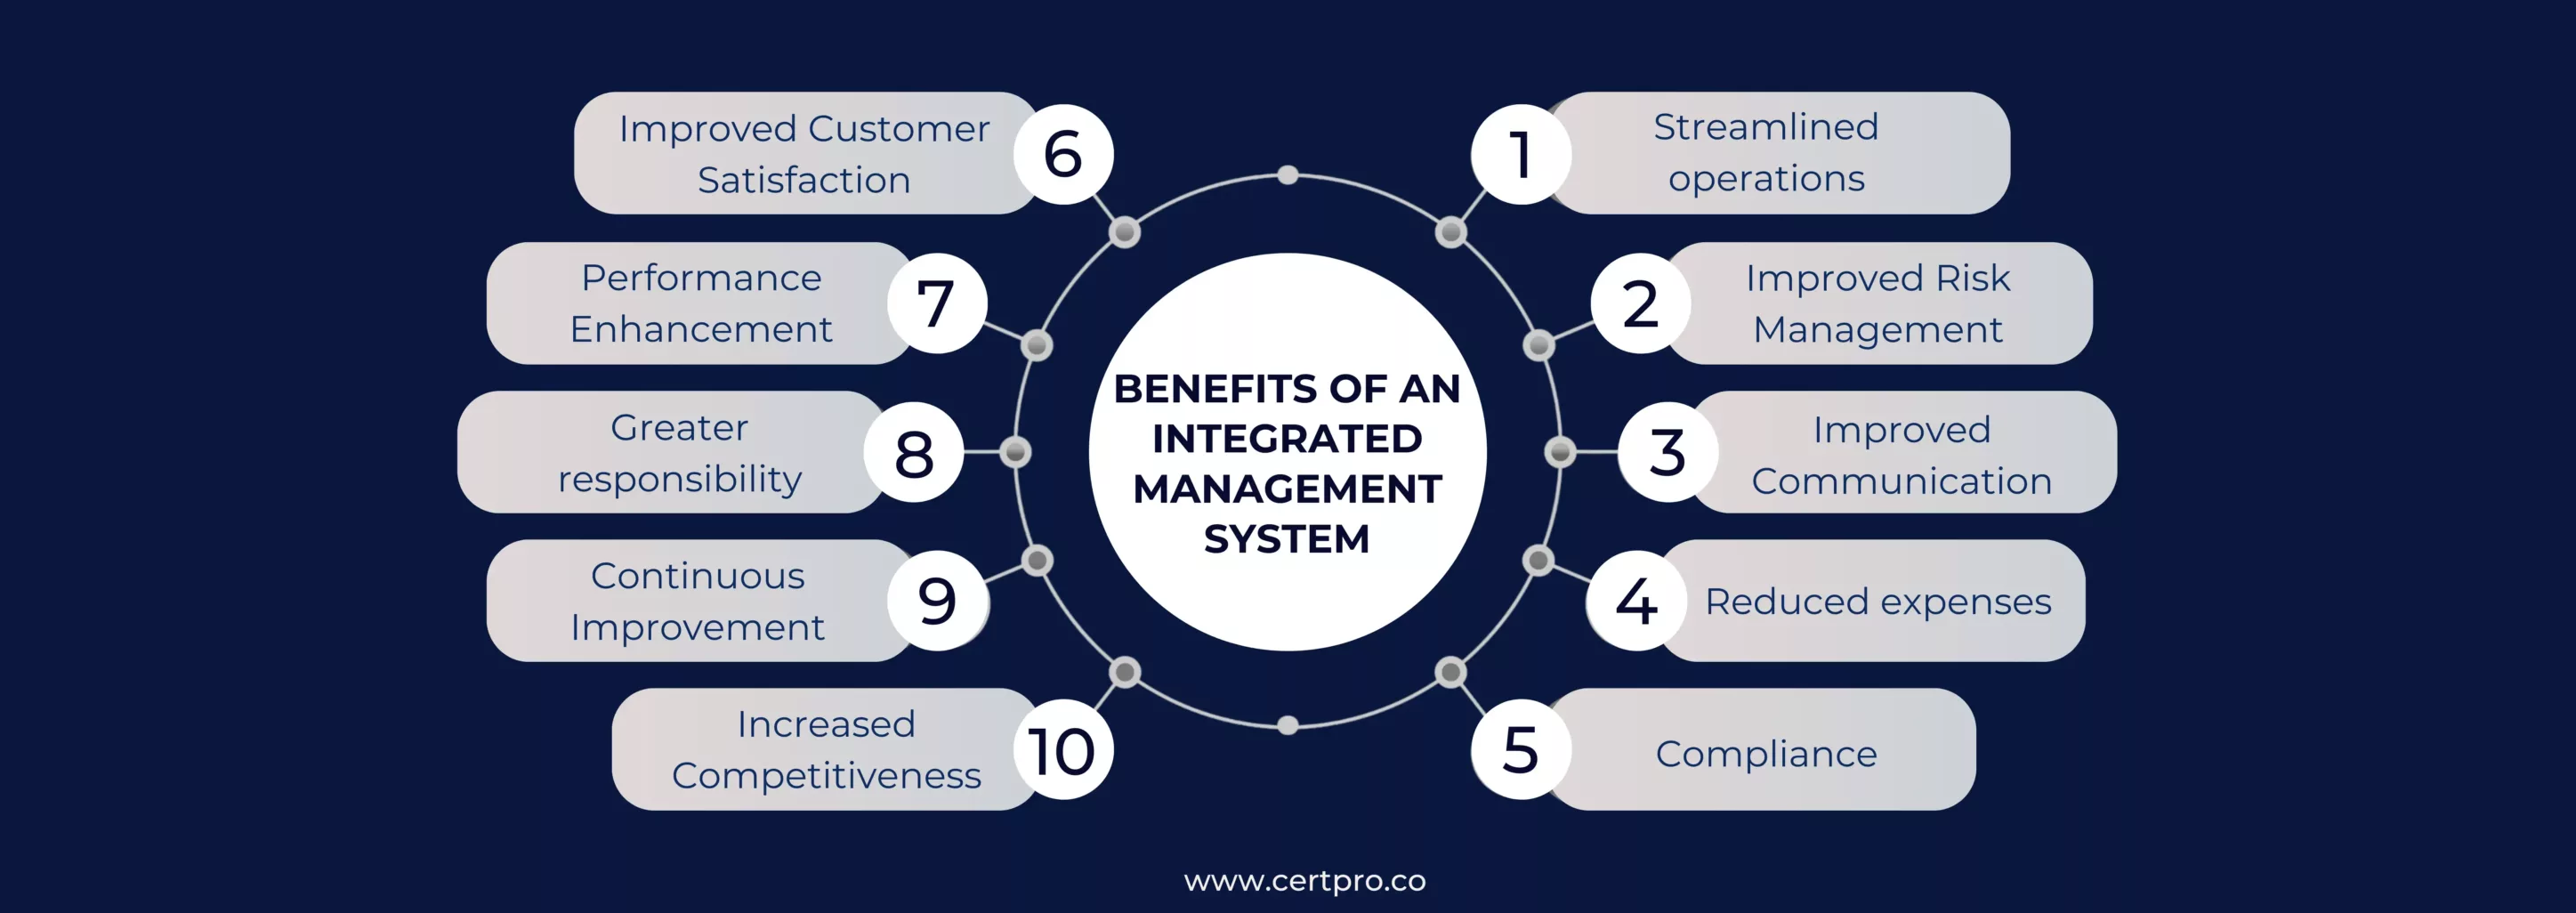 BENEFITS OF AN INTEGRATED MANAGEMENT SYSTEM